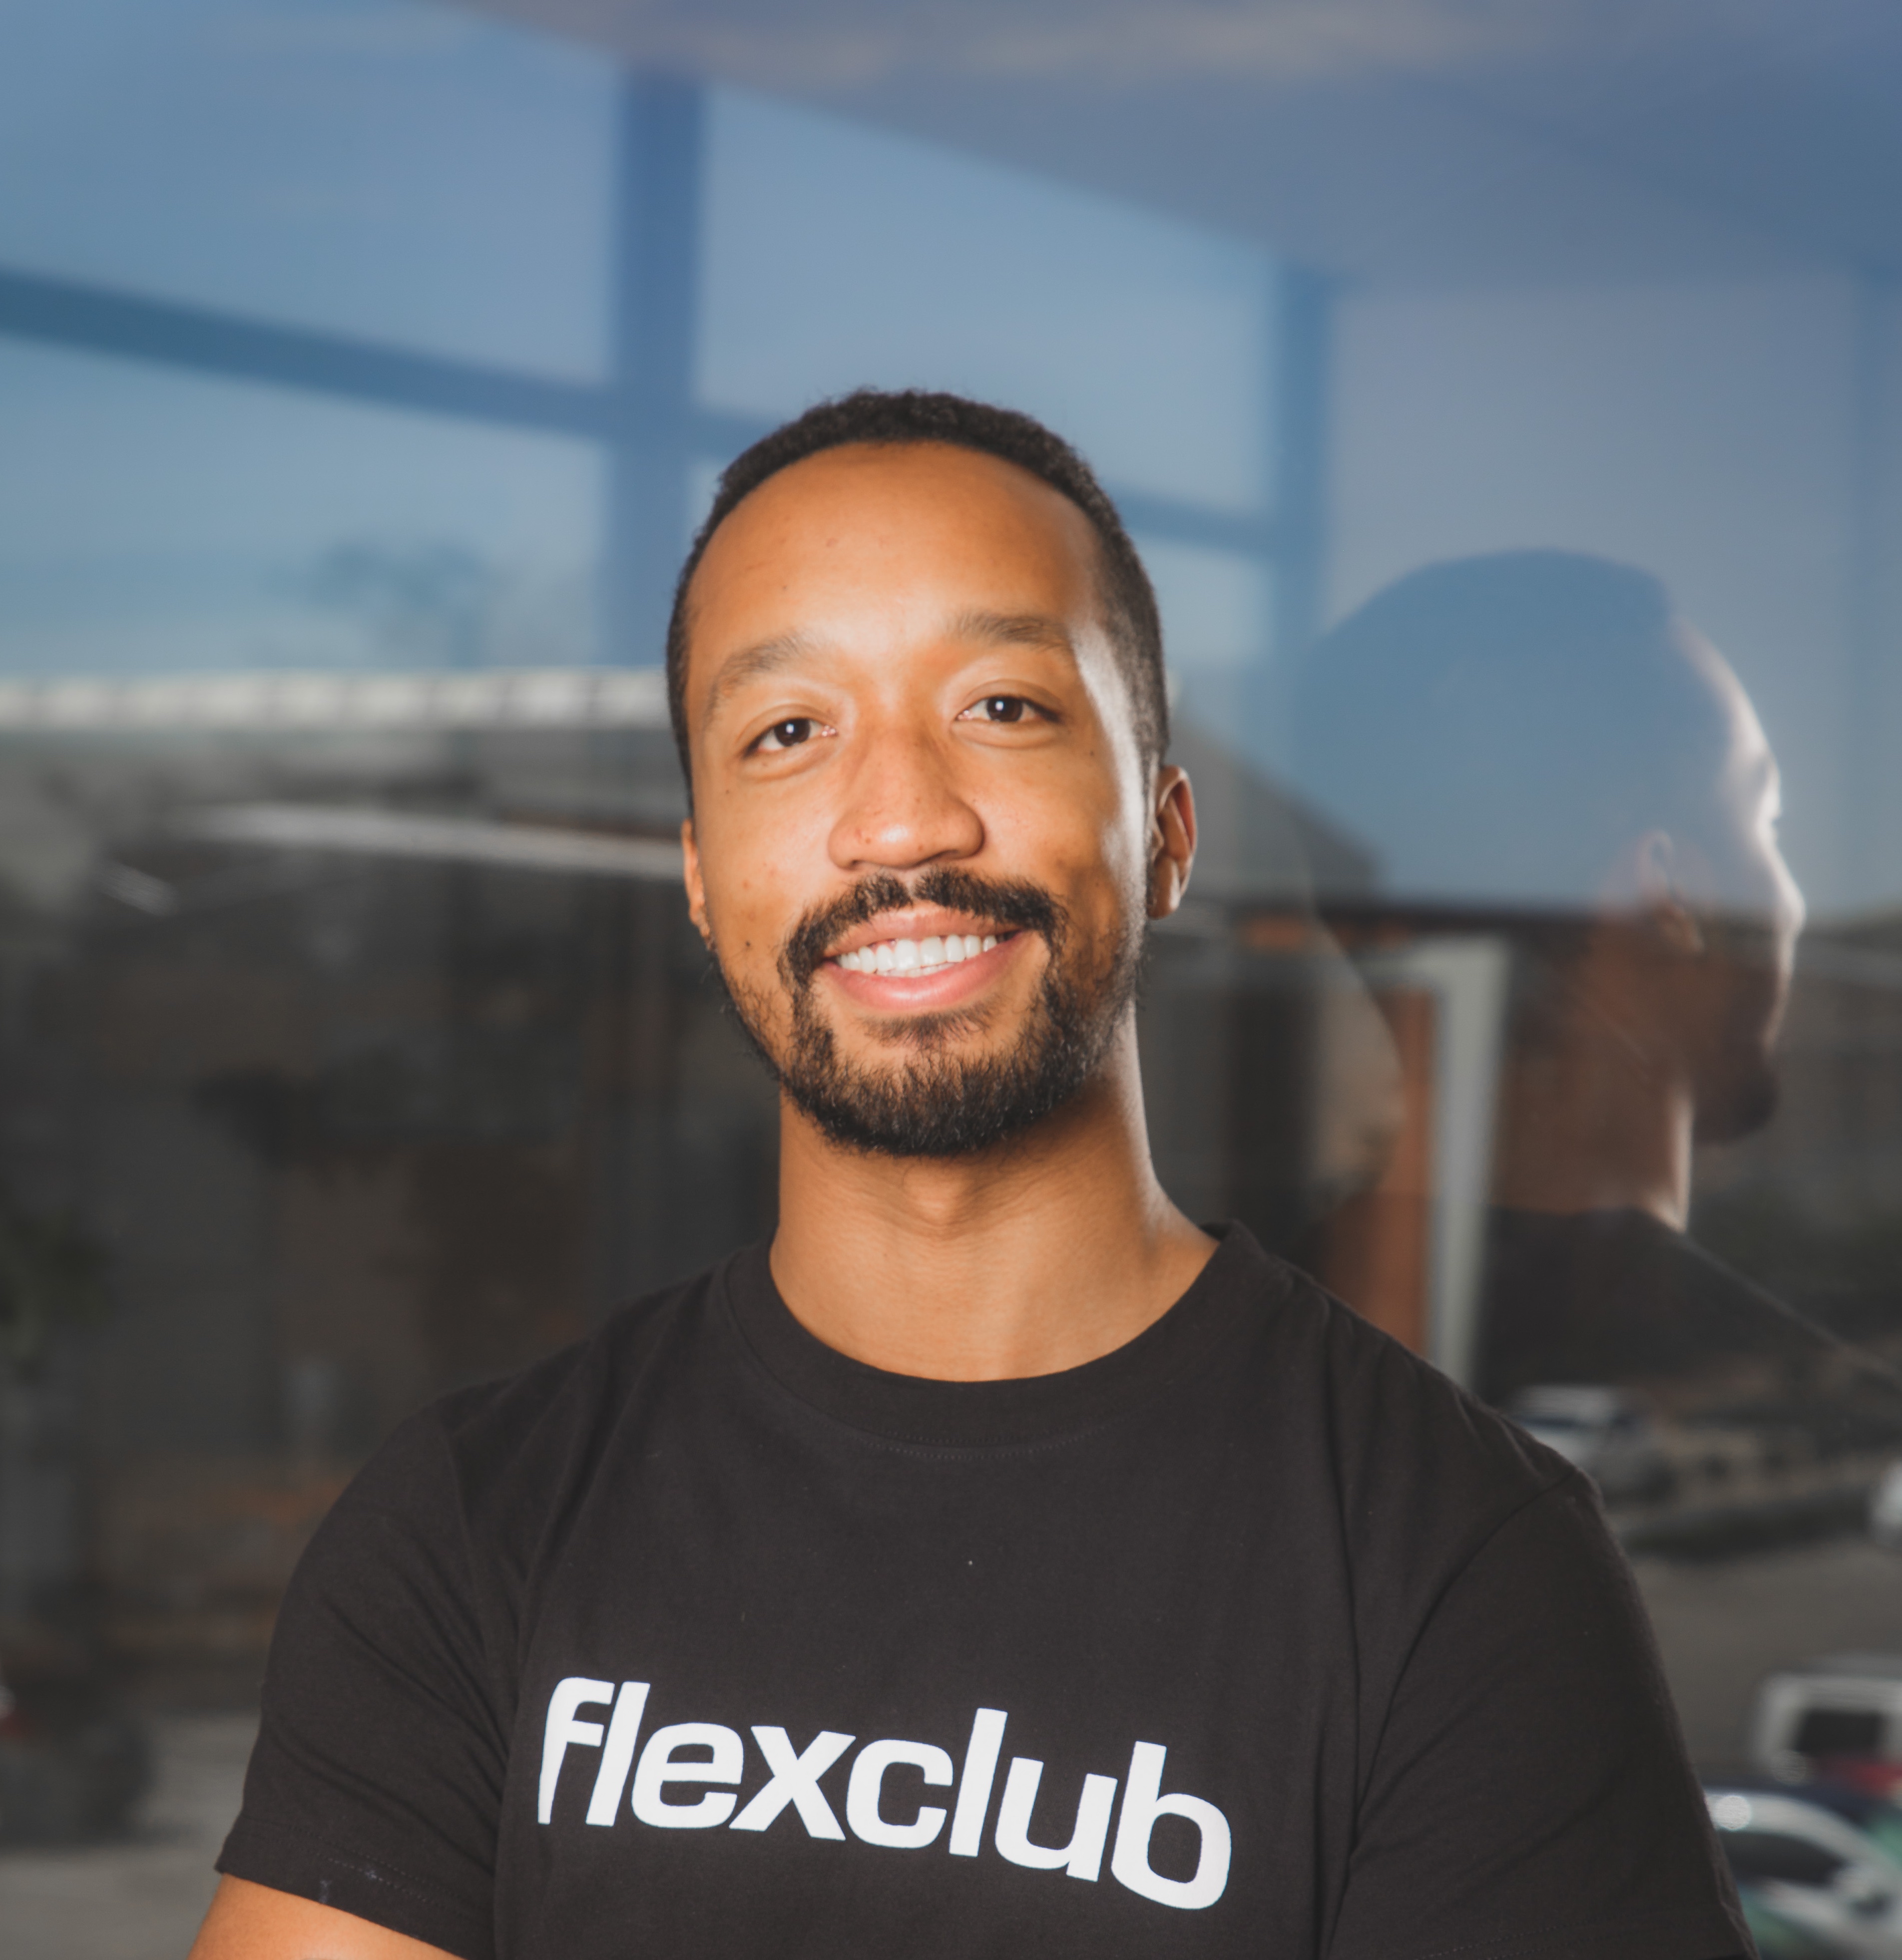 This South African Startup Just Partnered With Uber Mexico And Reached $1.2 Million in Funding